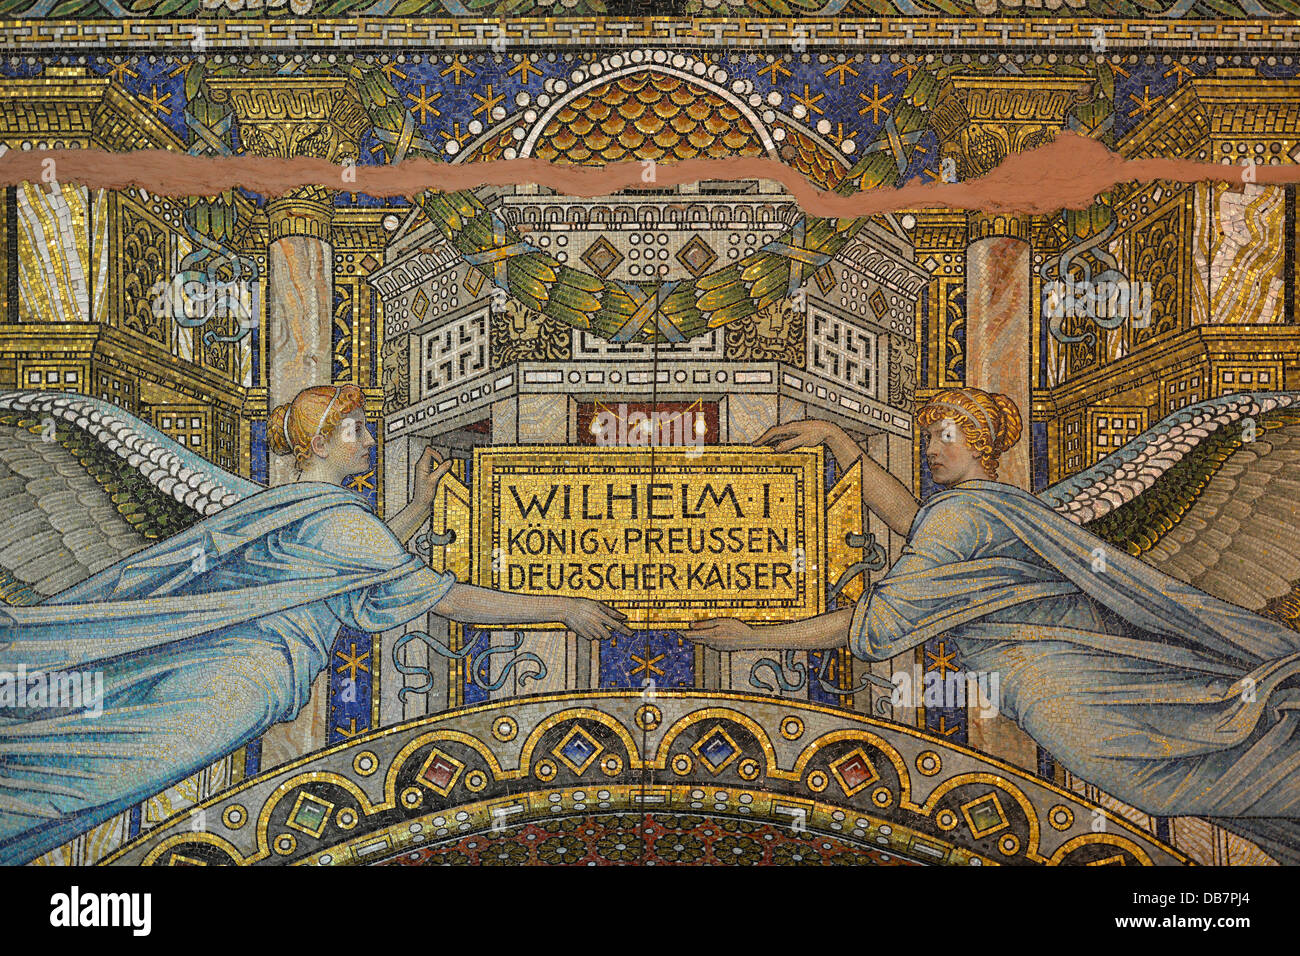 Dedication panel to Wilhelm I above the entrance portal, ceiling mosaic, Memorial Hall in the old tower of Kaiser Wilhelm Stock Photo